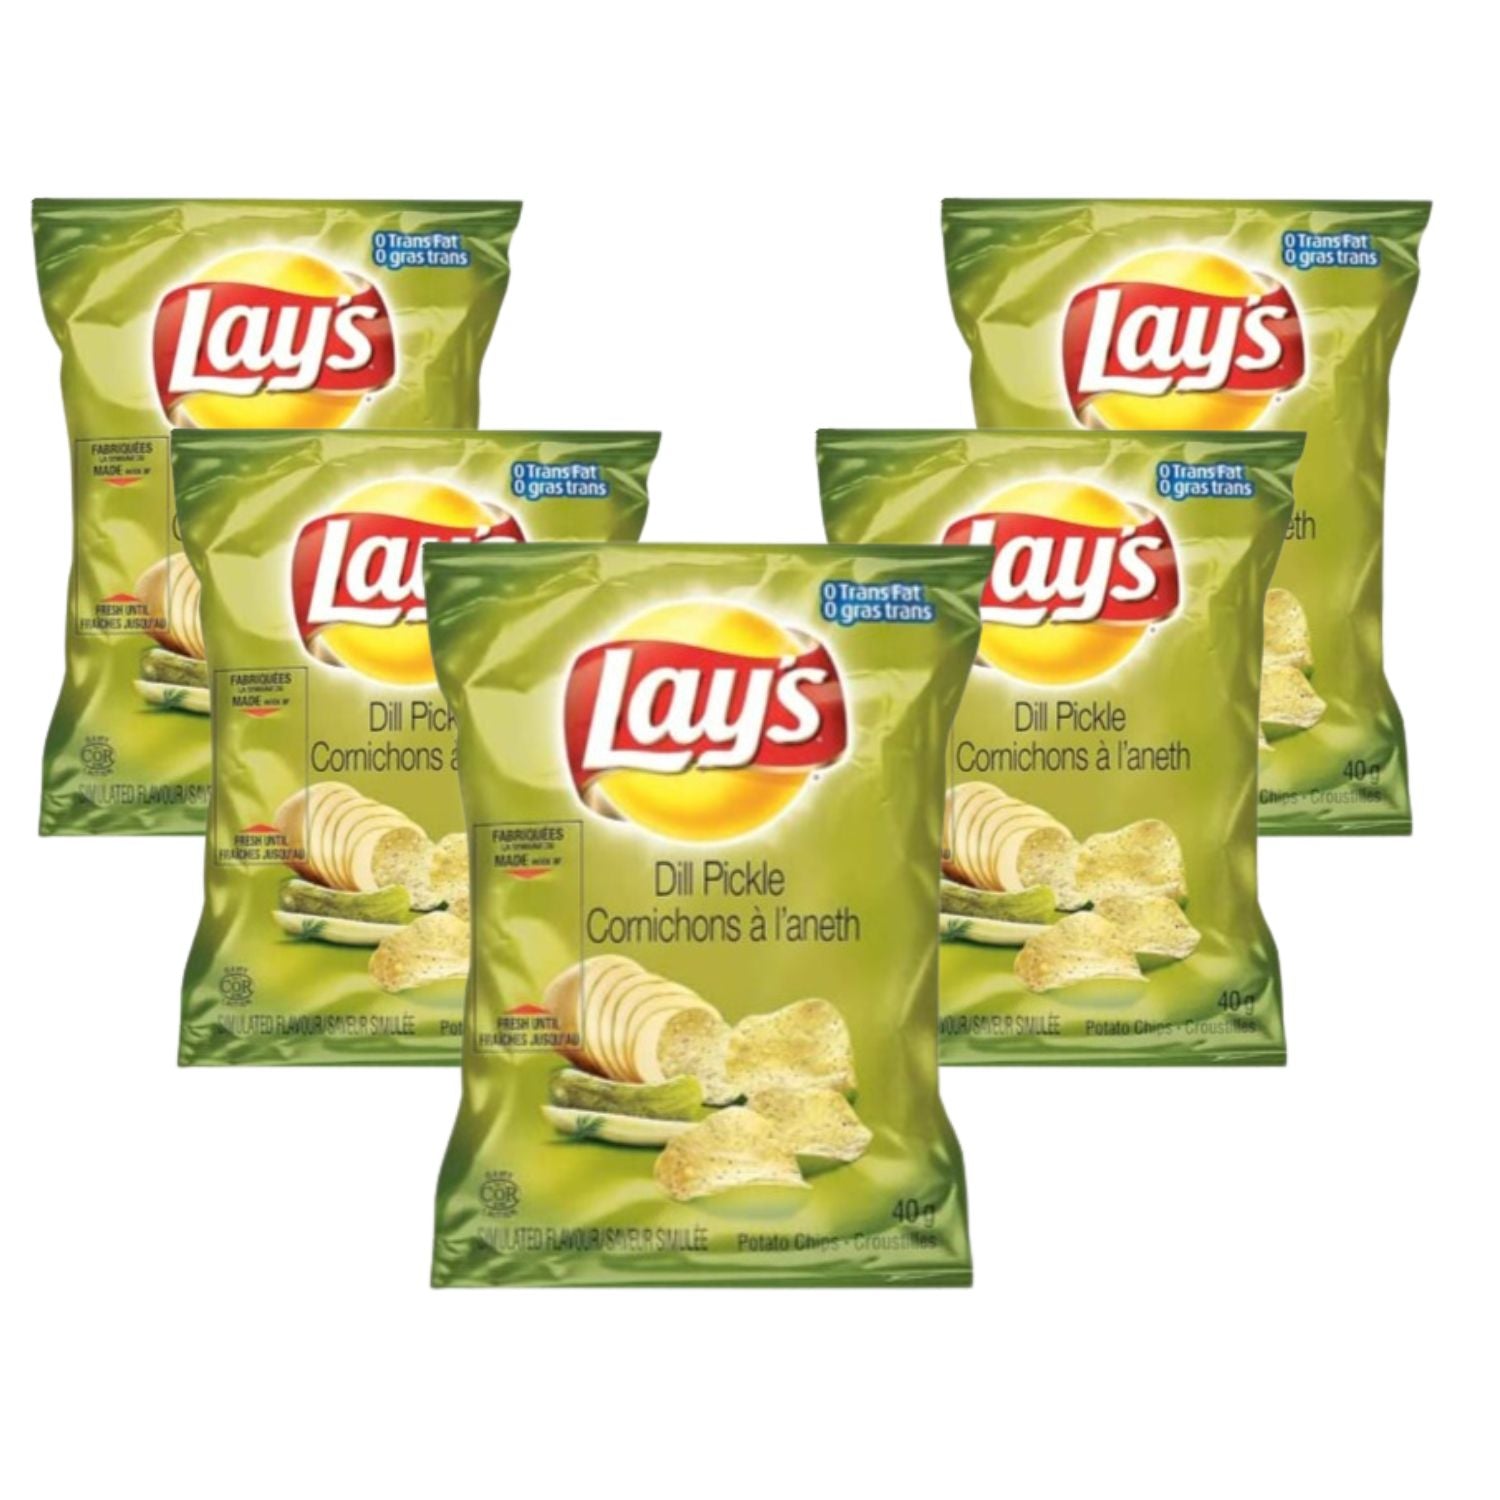 Lays Dill Pickle Potato Chips Snack Bag pack of 5